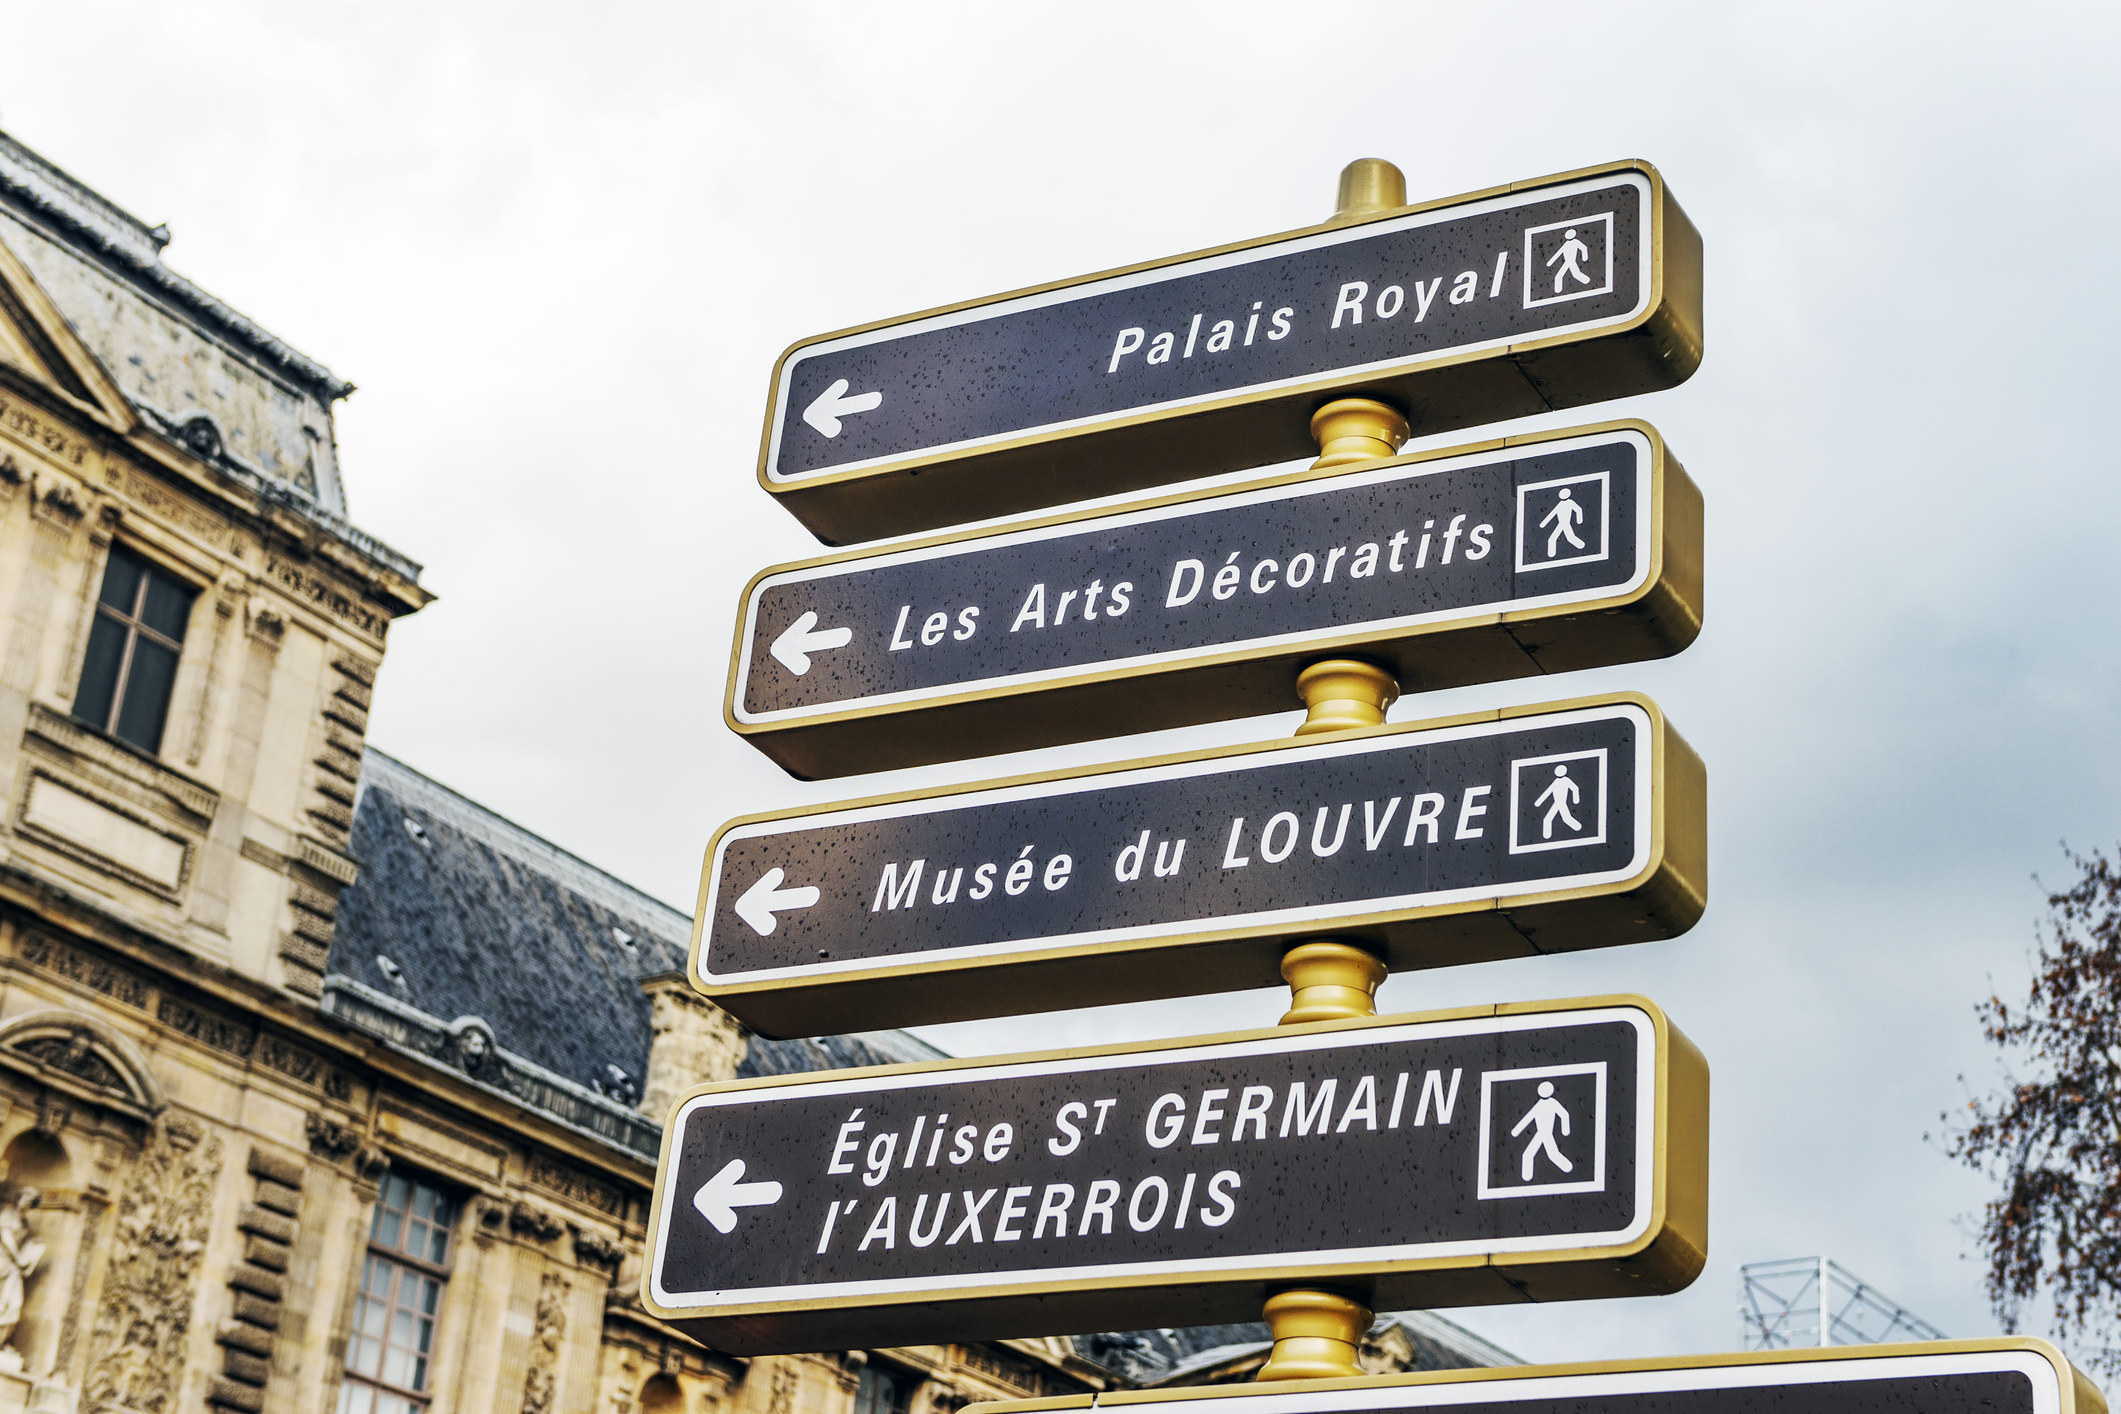 Multi direction sign for tourists in Paris.